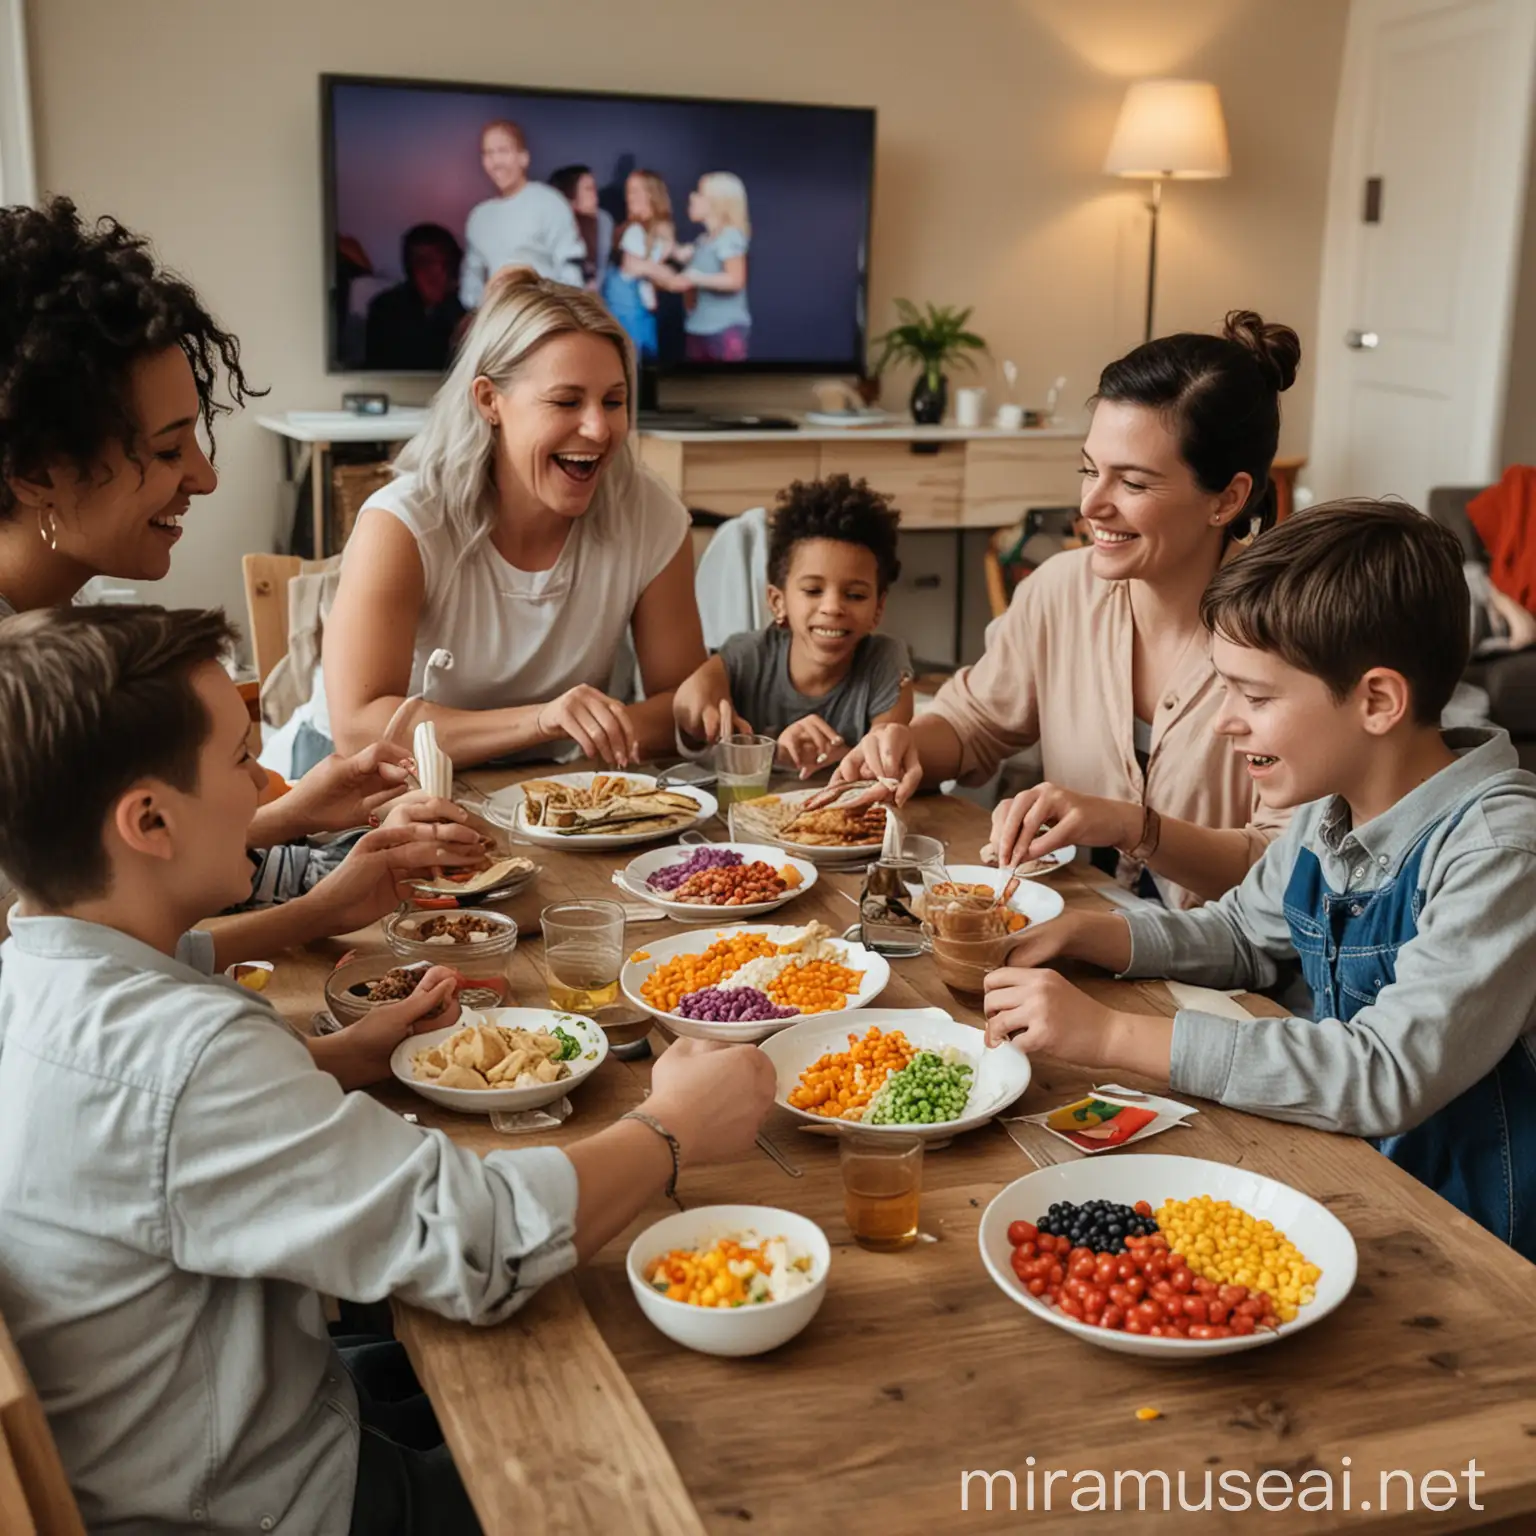 image capturing moments between LGBTQ+ parents and their children like :Families at mealtime, playing games, watching movies or TV